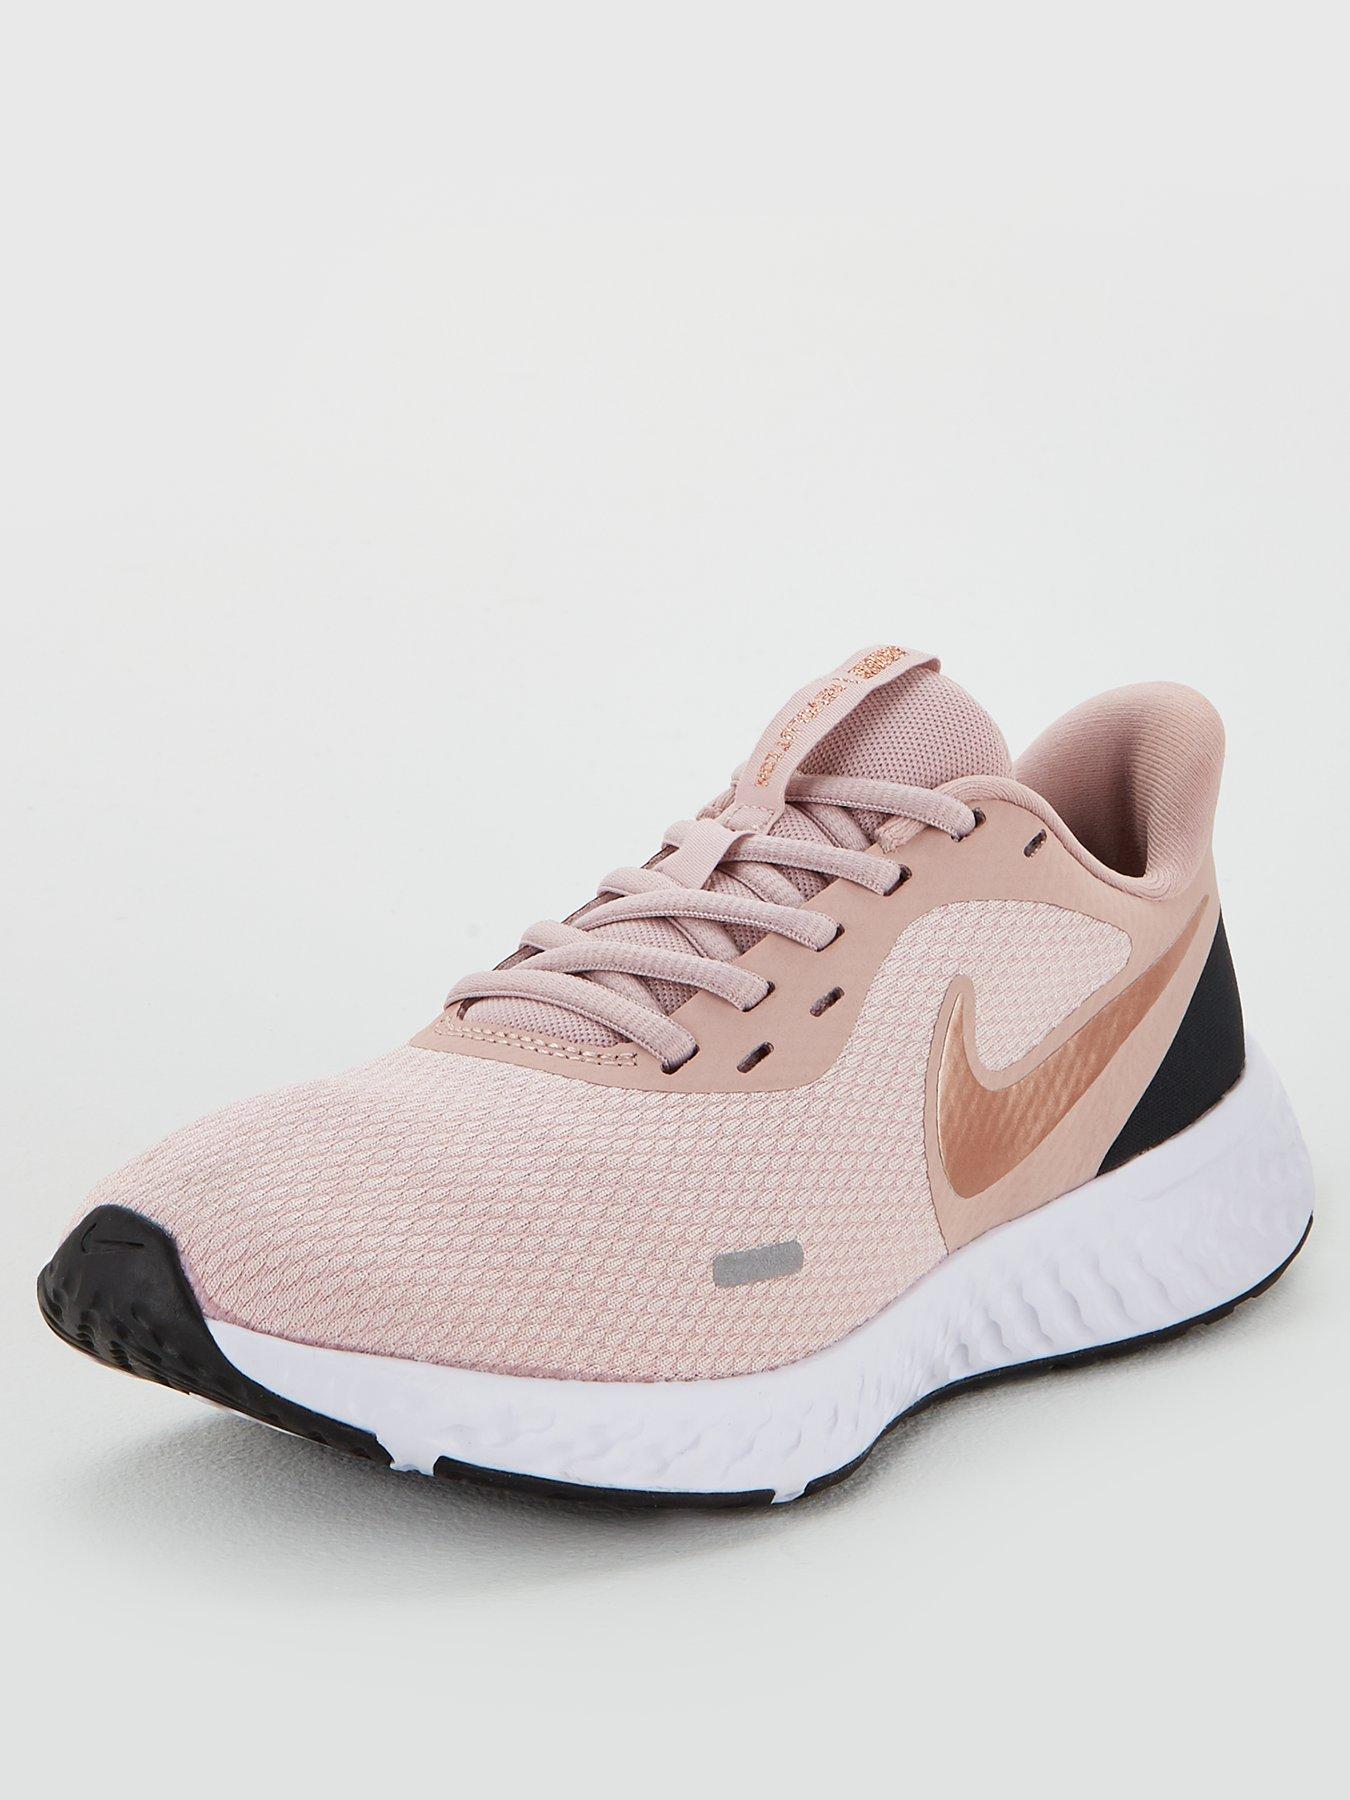 nike pastel pink trainers